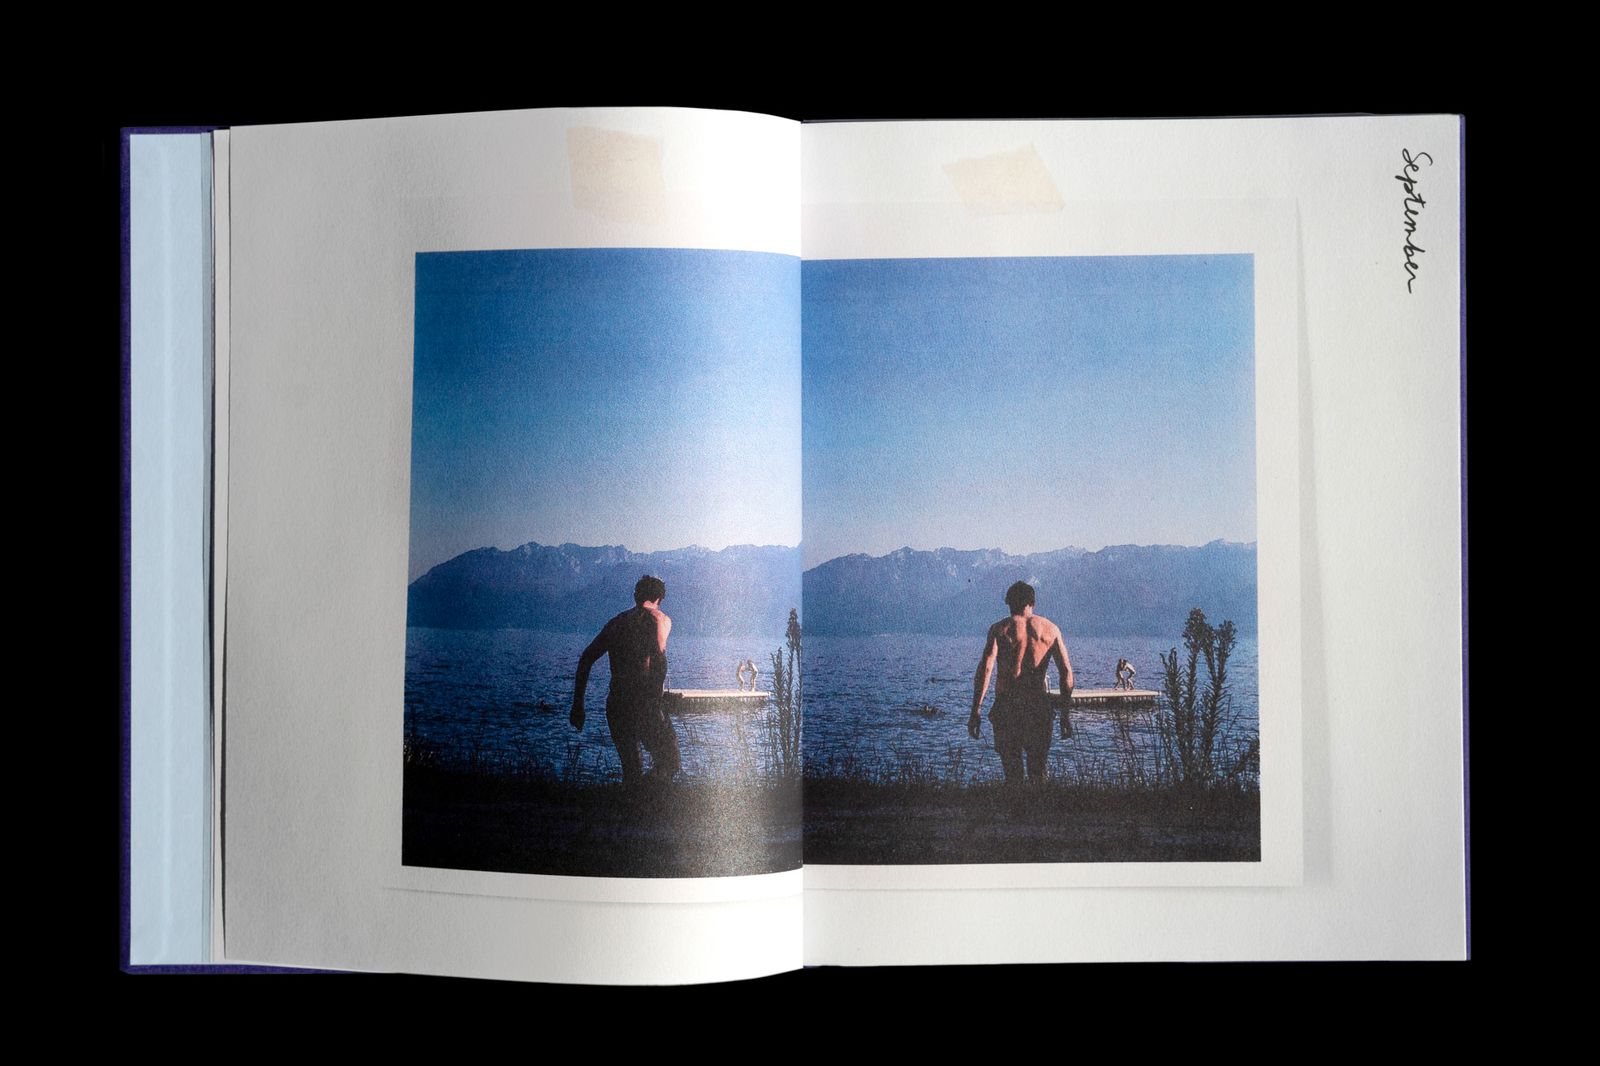 Photobook Review: Another Love Story by Karla Hiraldo Voleau